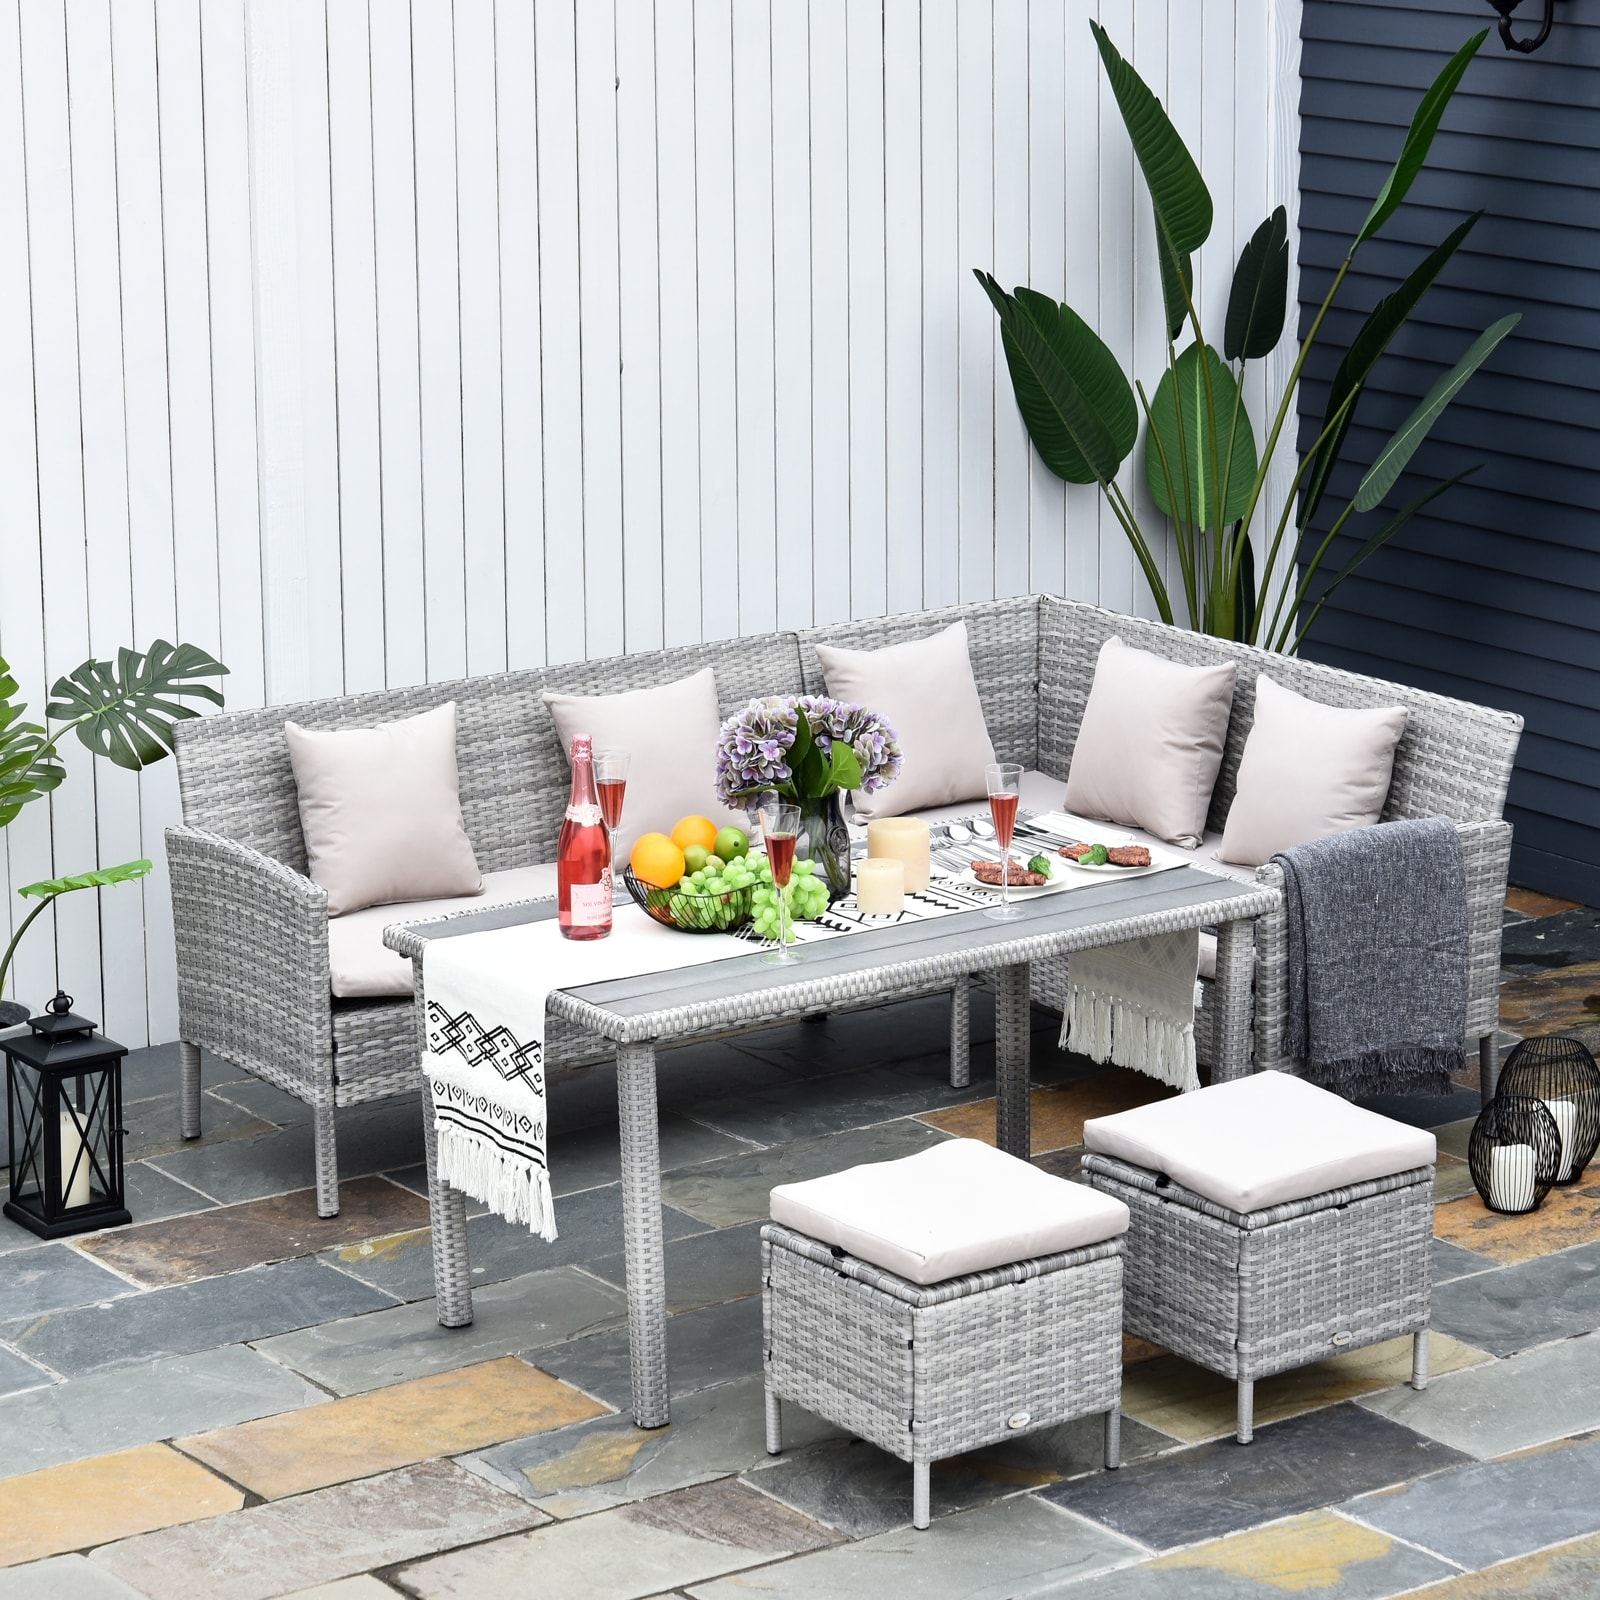 Brushed Mixed Gray Wicker Outdoor 5 Piece Furniture Set Patio Sectional Rattan Sofa Sets All Weather PE Wicker Couch Conversation Set with Table White Cushions